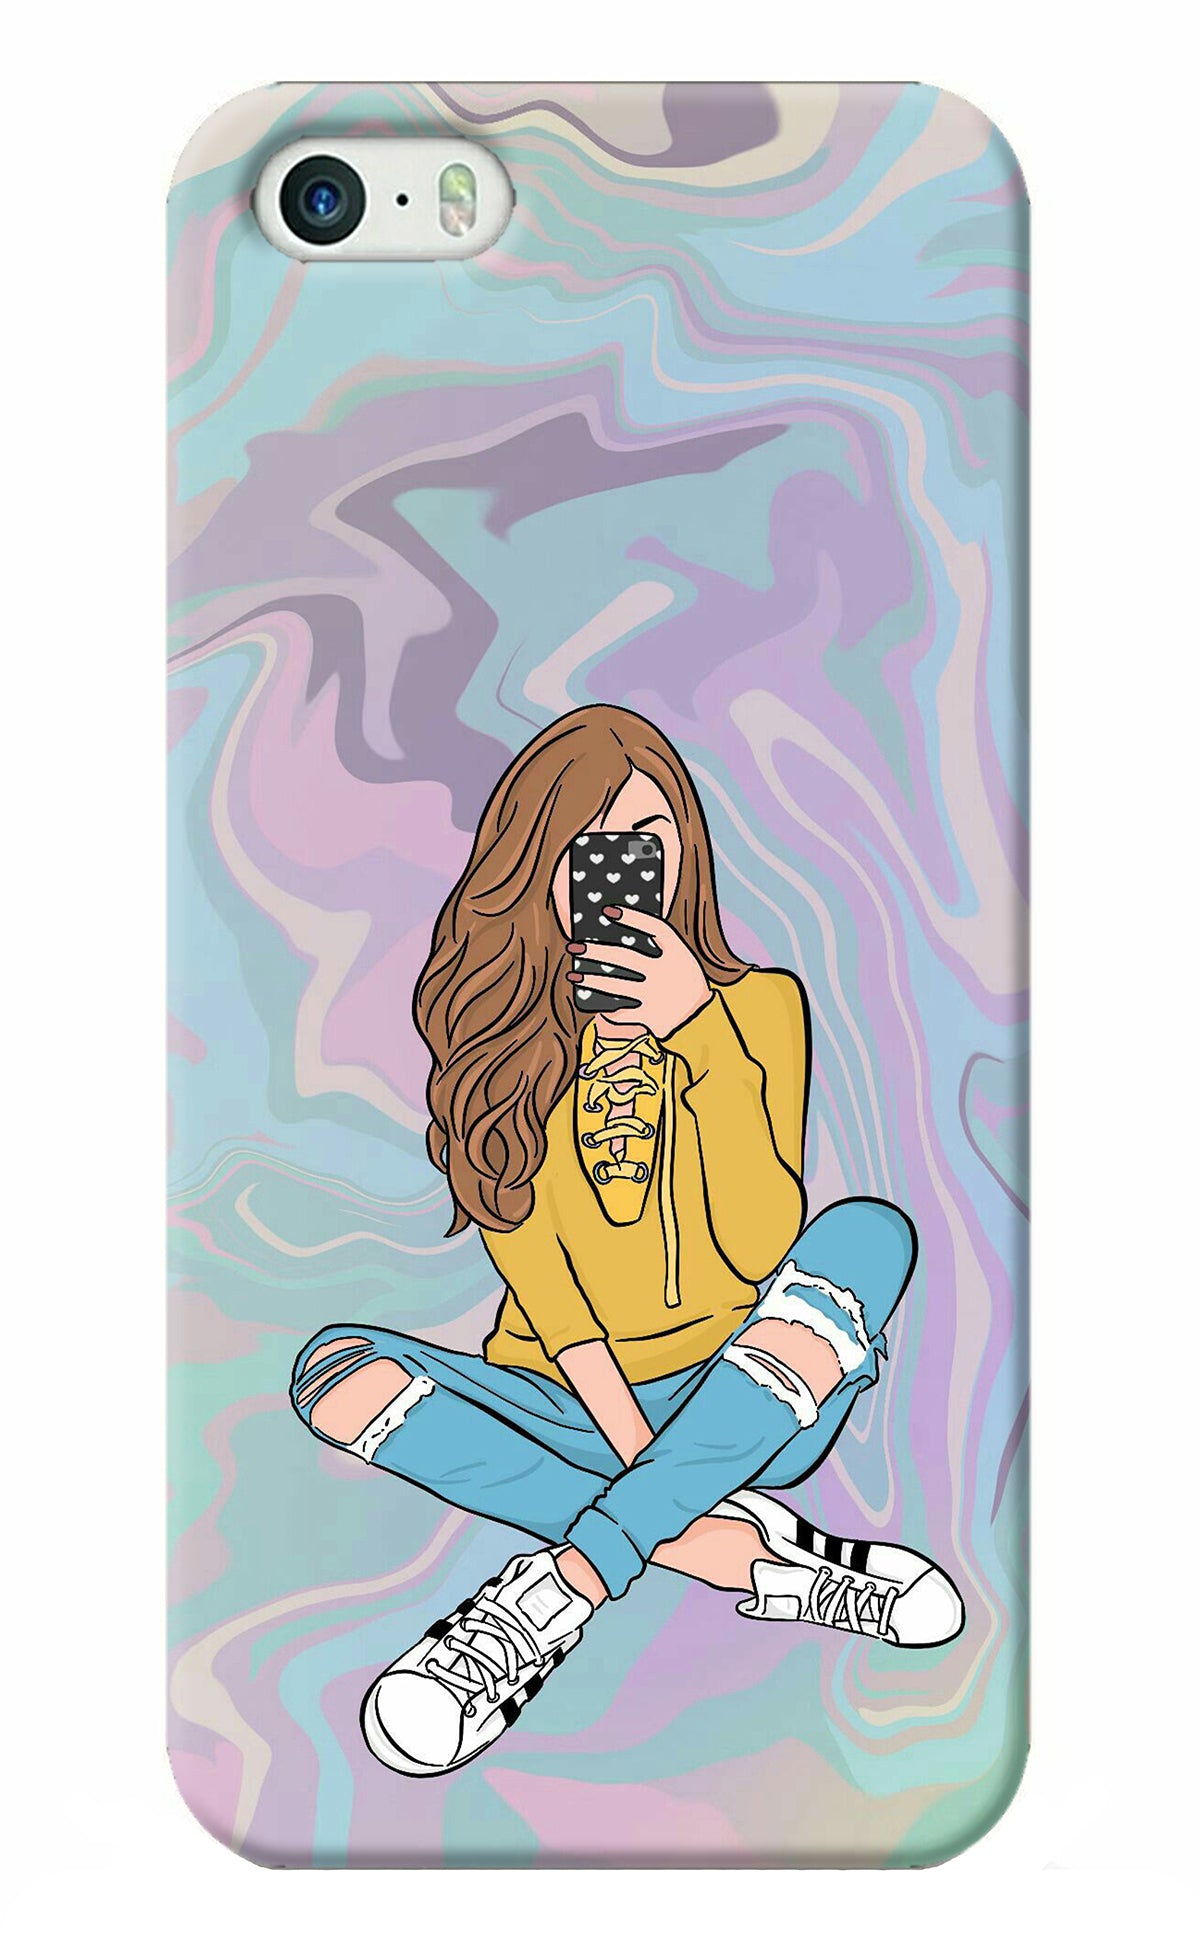 Selfie Girl iPhone 5/5s Back Cover